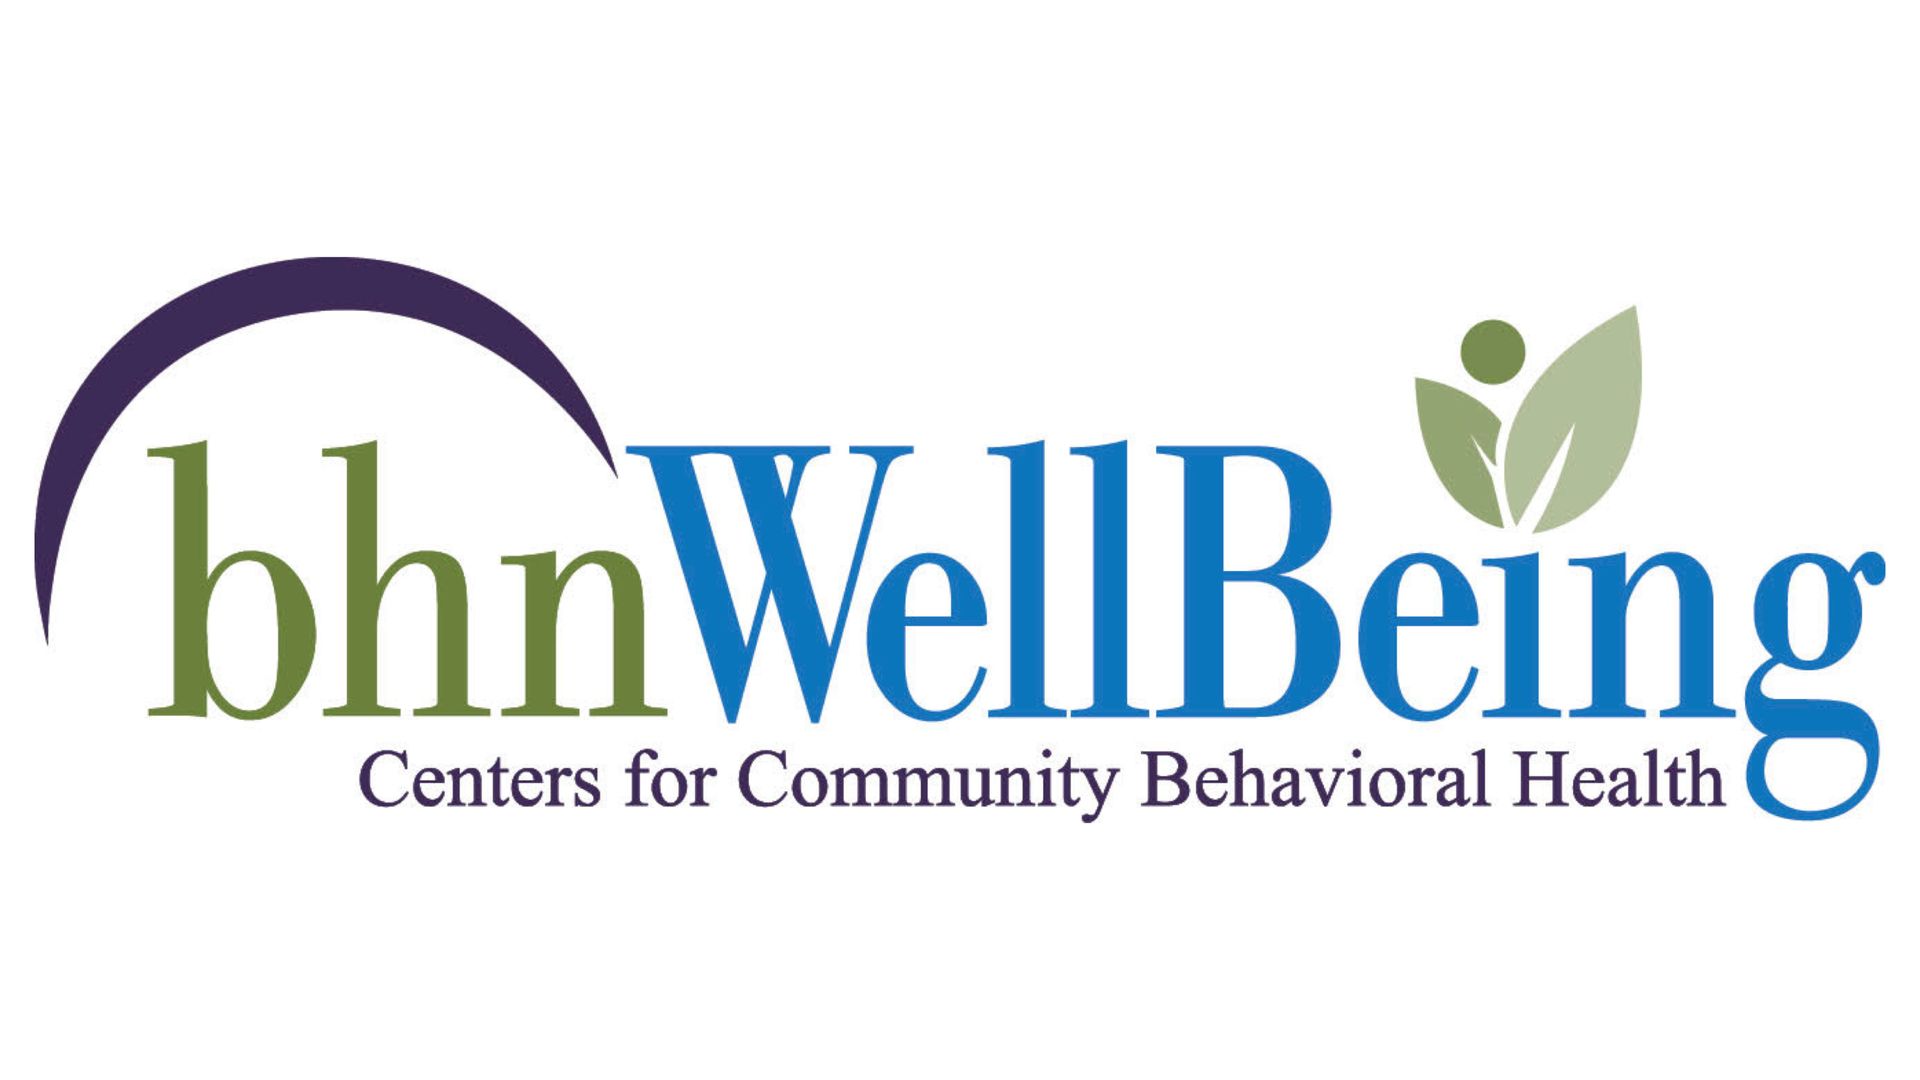 Branding and Launch of BHN WellBeing - Community Behavioral Health Centers